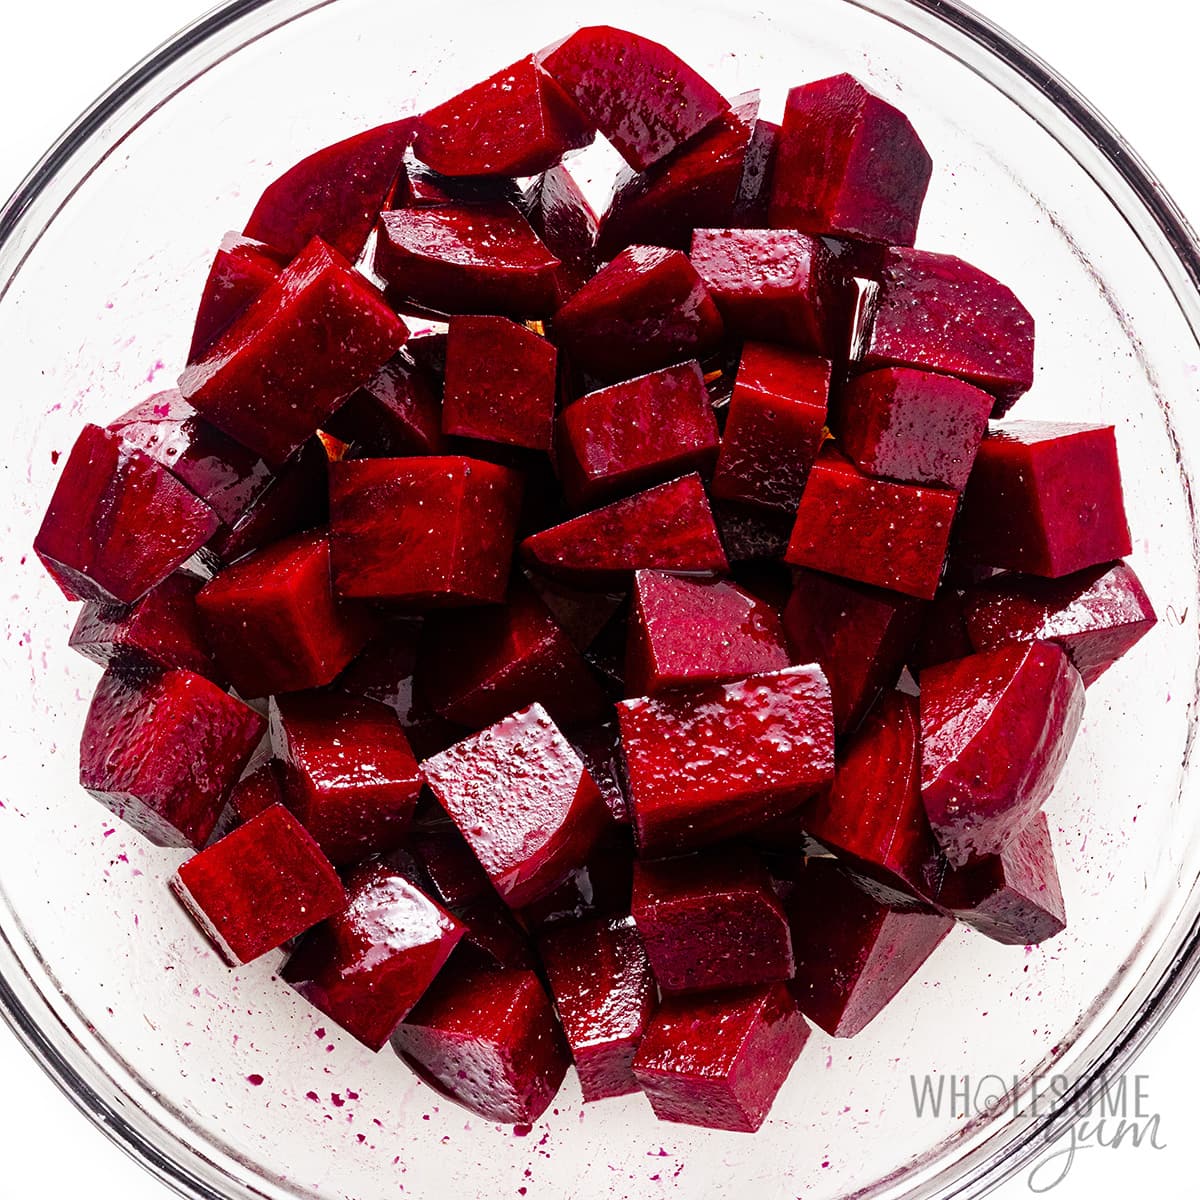 Cubed beets seasoned in a bowl.